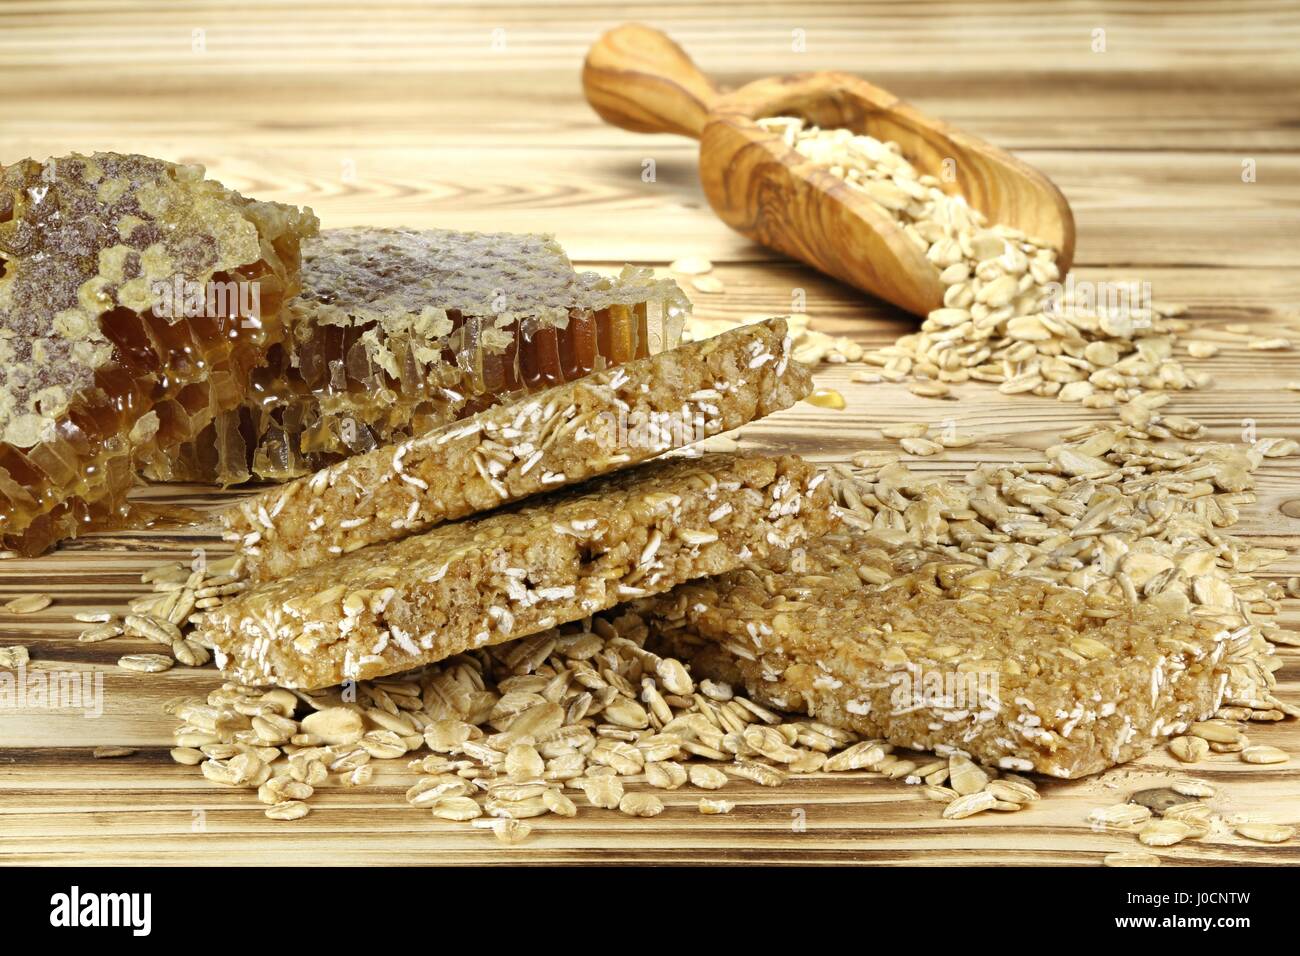 granola bars with ingredients on wooden background Stock Photo